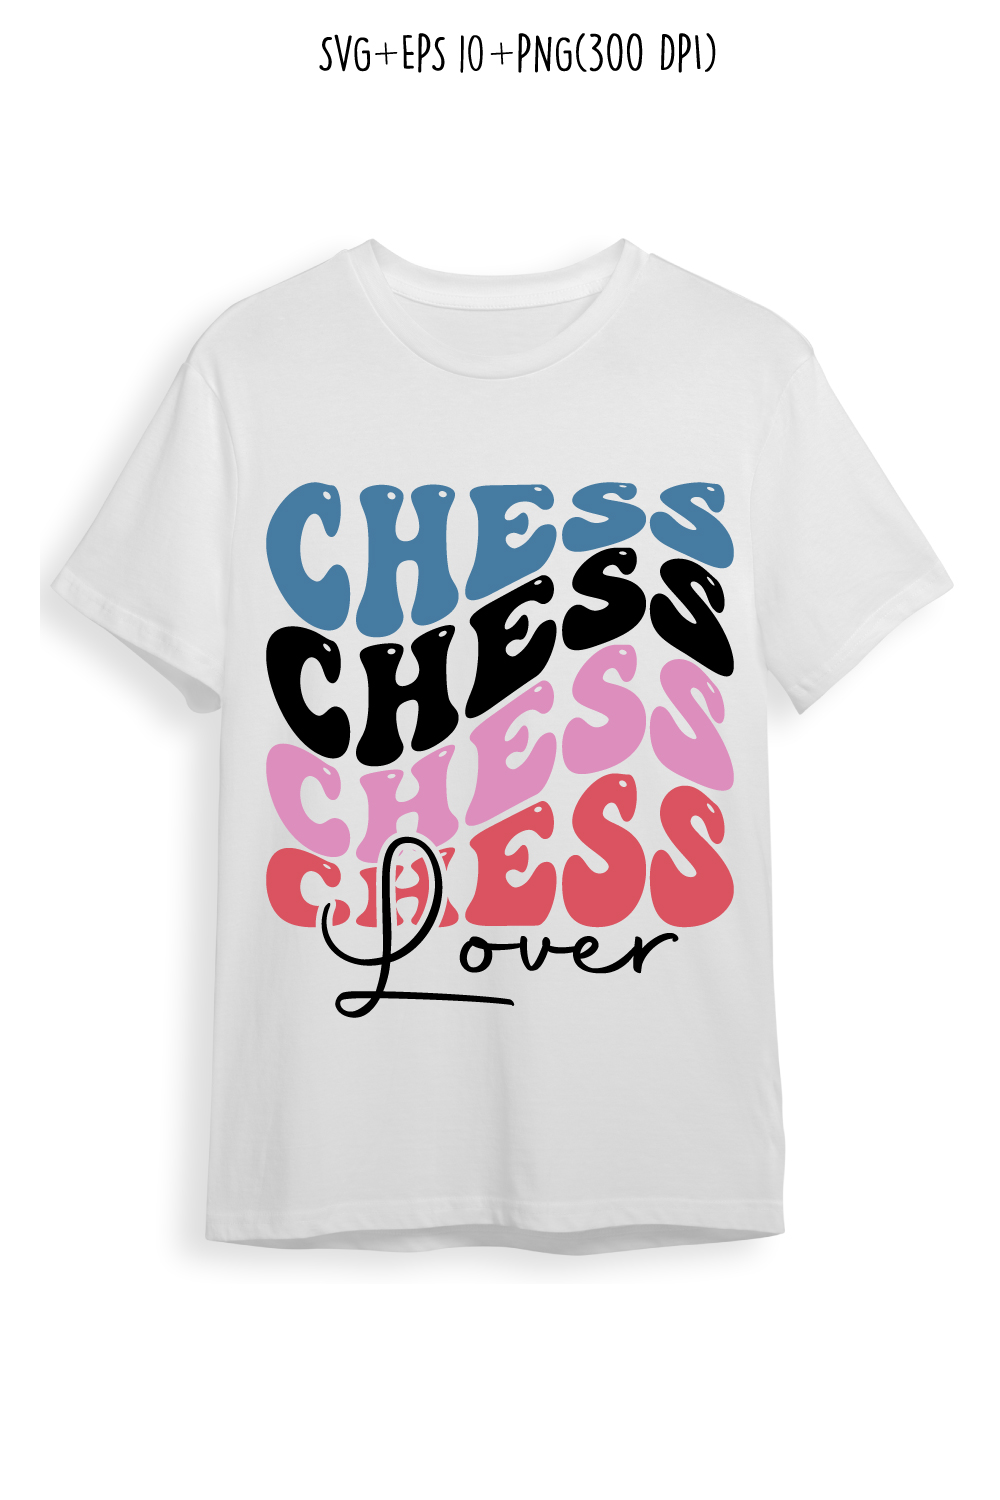 Chess lover indoor game retro typography design for t-shirts, cards, frame artwork, phone cases, bags, mugs, stickers, tumblers, print, etc pinterest preview image.